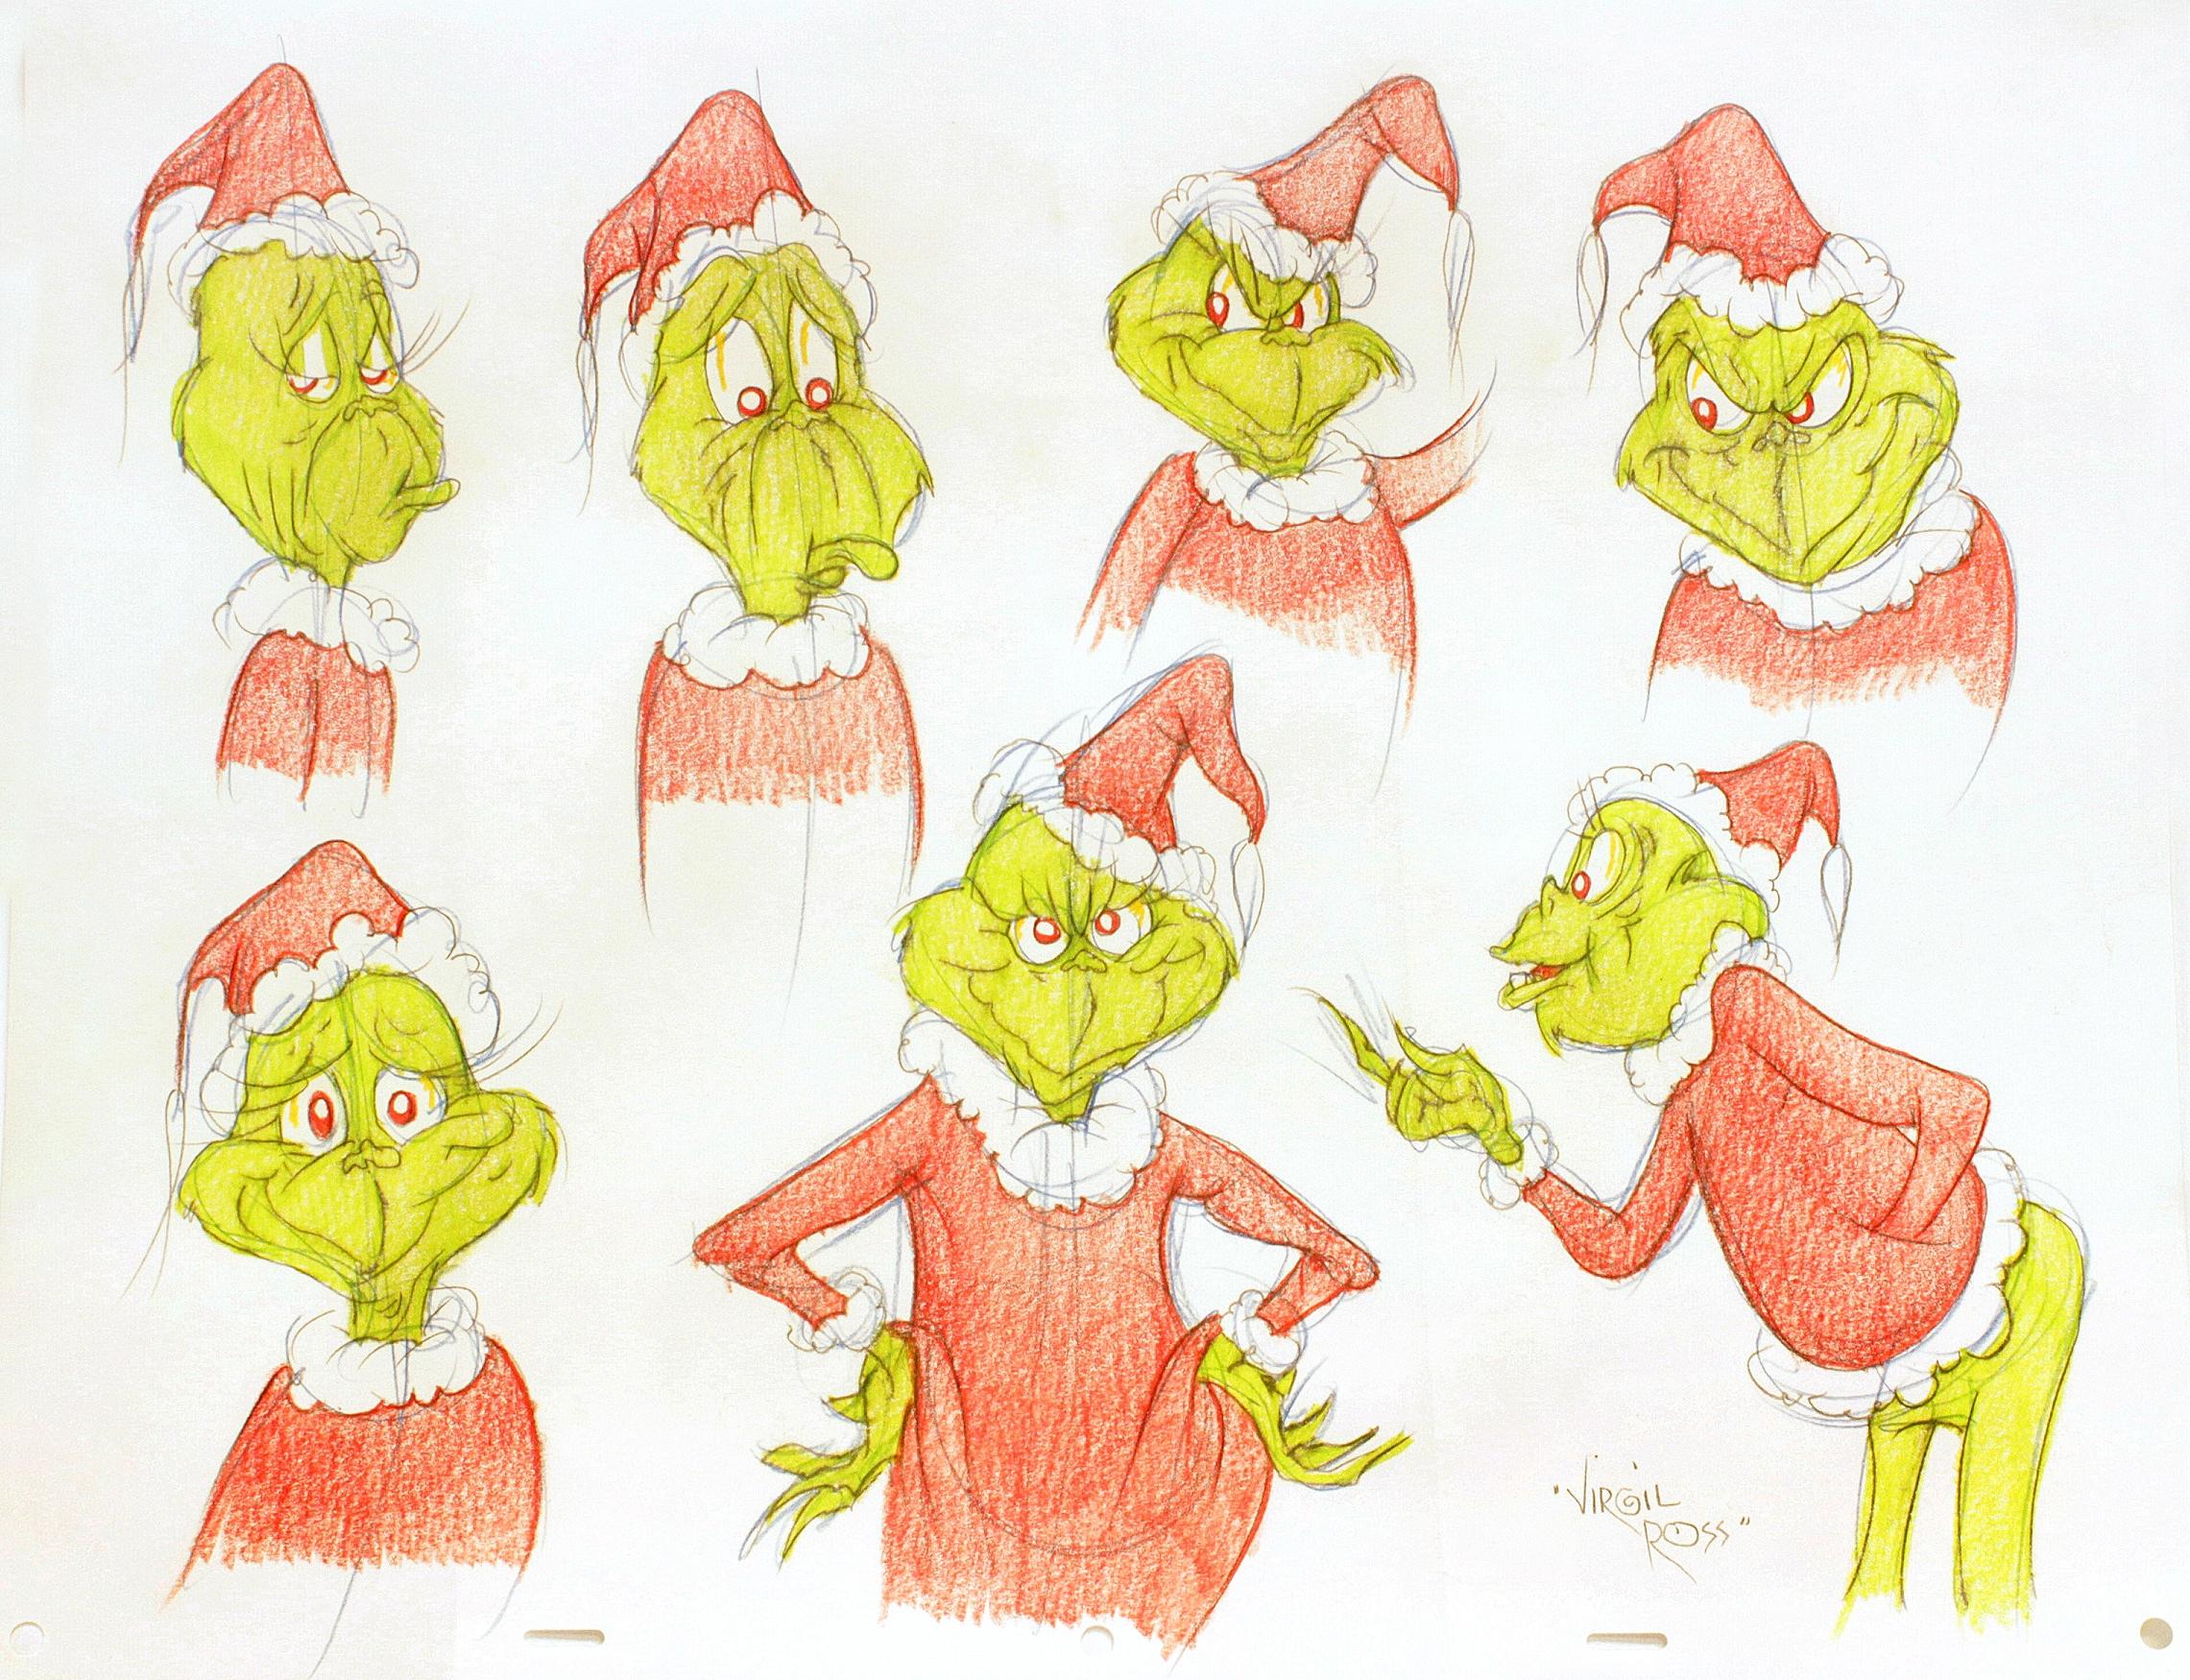 Author: GEISEL, Theodore: (Dr. Seuss) ( Virgil Ross ). 

Title: How The Grinch Stole Christmas. (Seven Original drawings).

Publisher: Warner Brothers Studios, (c.1990's)

Description: Seven Original Drawings Of The Grinch. 17